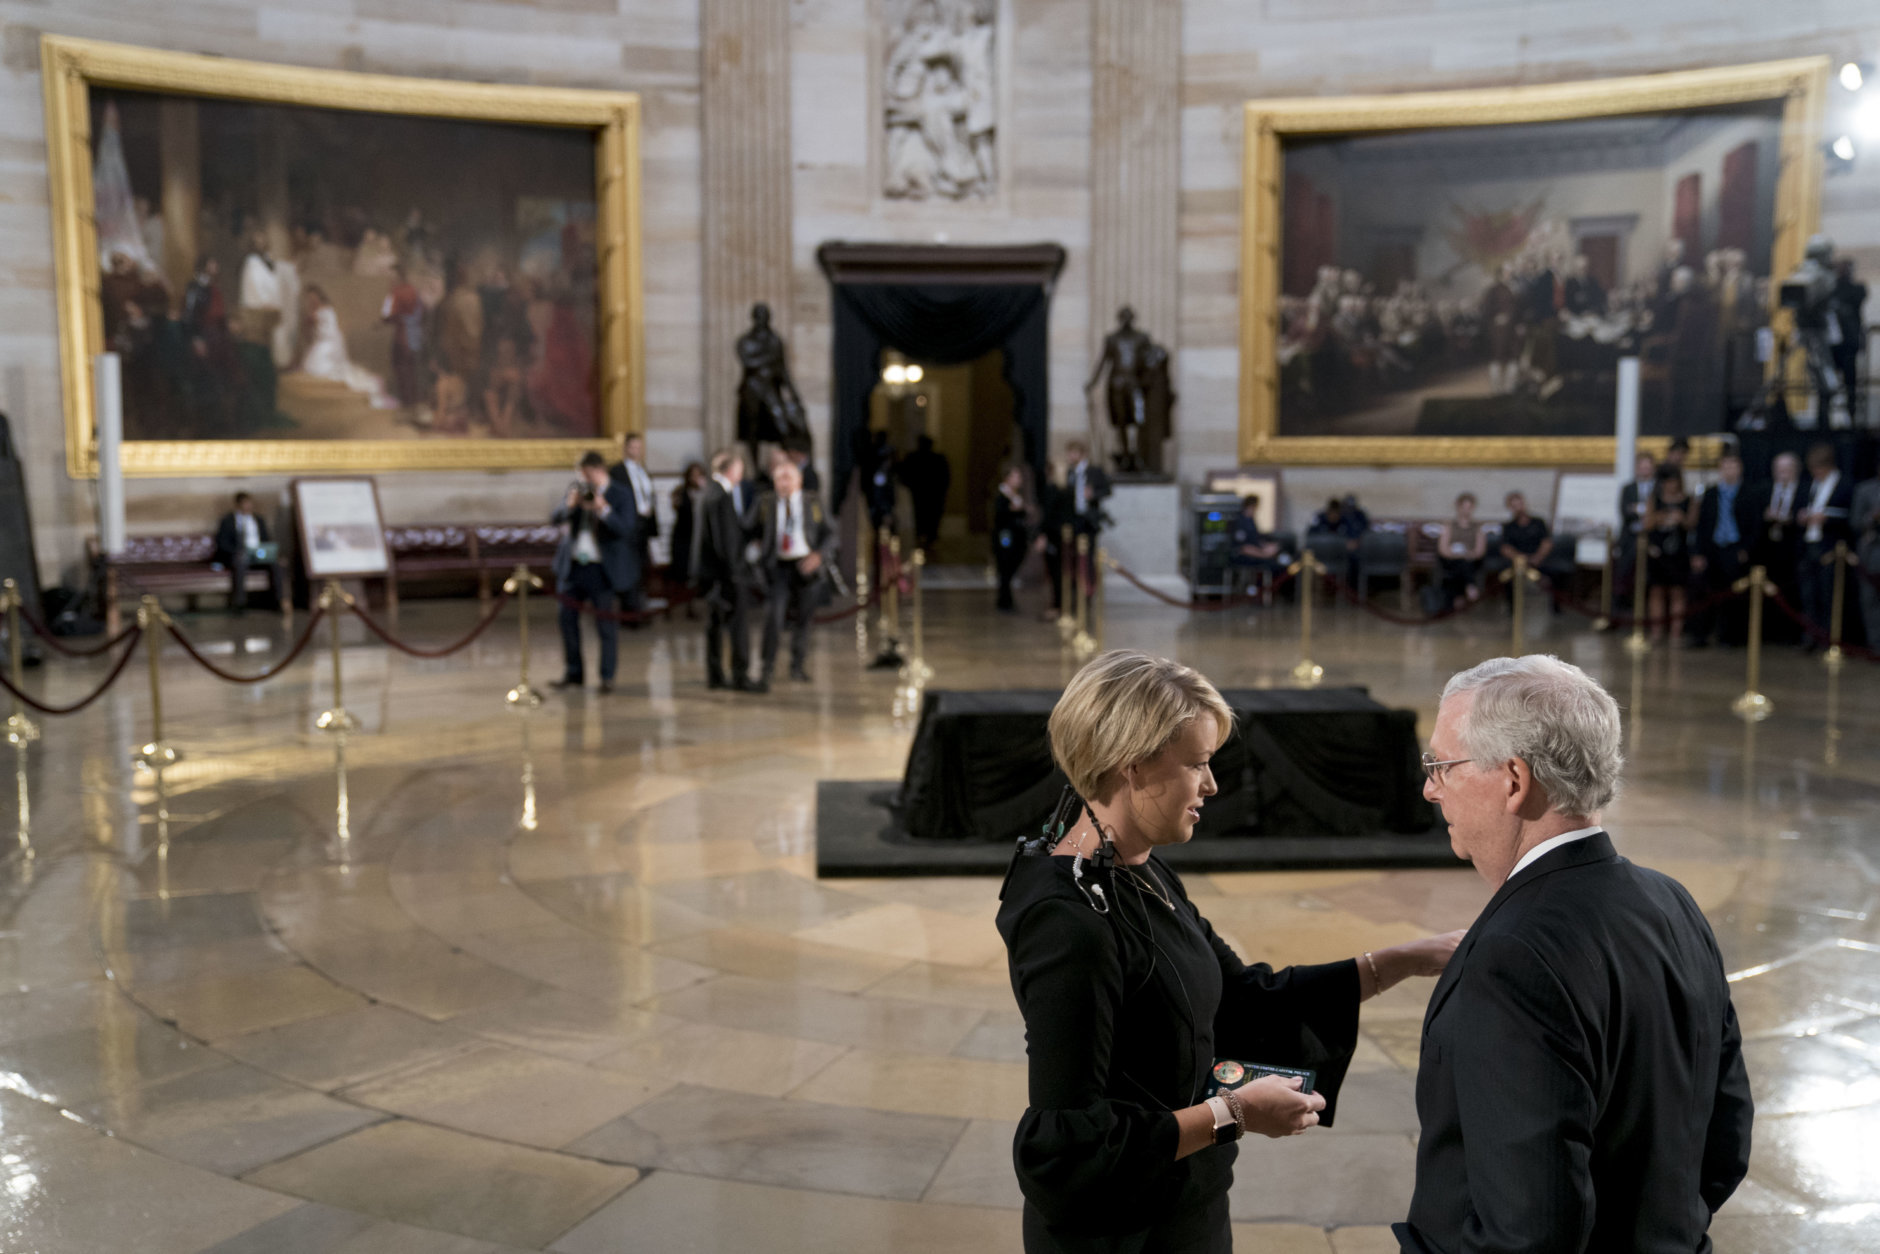 Senate Majority Leader Mitch McConnell of Ky., right, speaks to an aide before the casket of Sen. John McCain, R-Ariz., lies in state in the Rotunda of the U.S. Capitol, Friday, Aug. 31, 2018, in Washington. (AP Photo/Andrew Harnik, Pool)